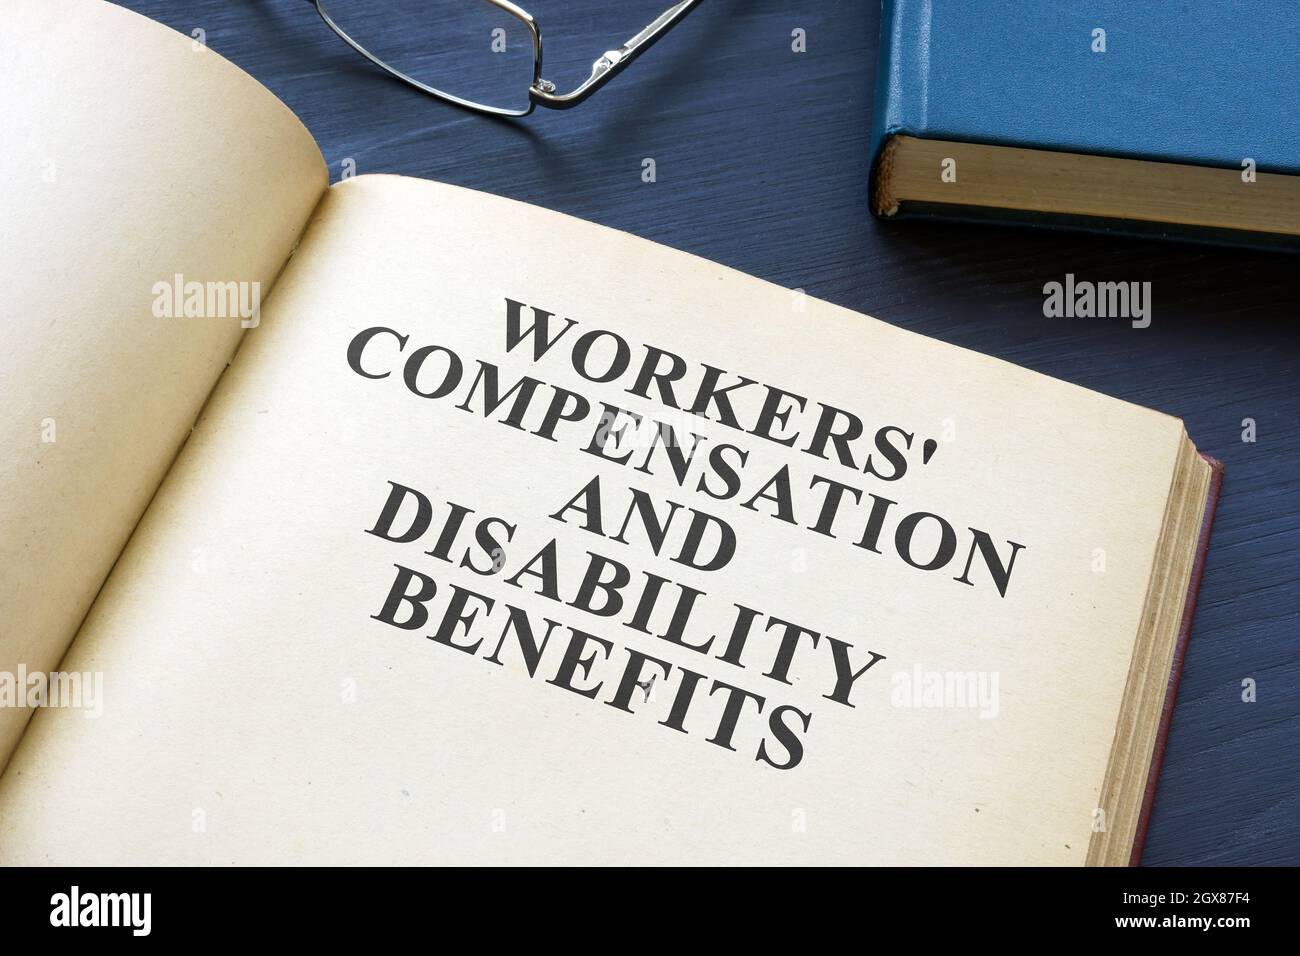 Open Workers Compensation and Disability Benefits law book. Stock Photo